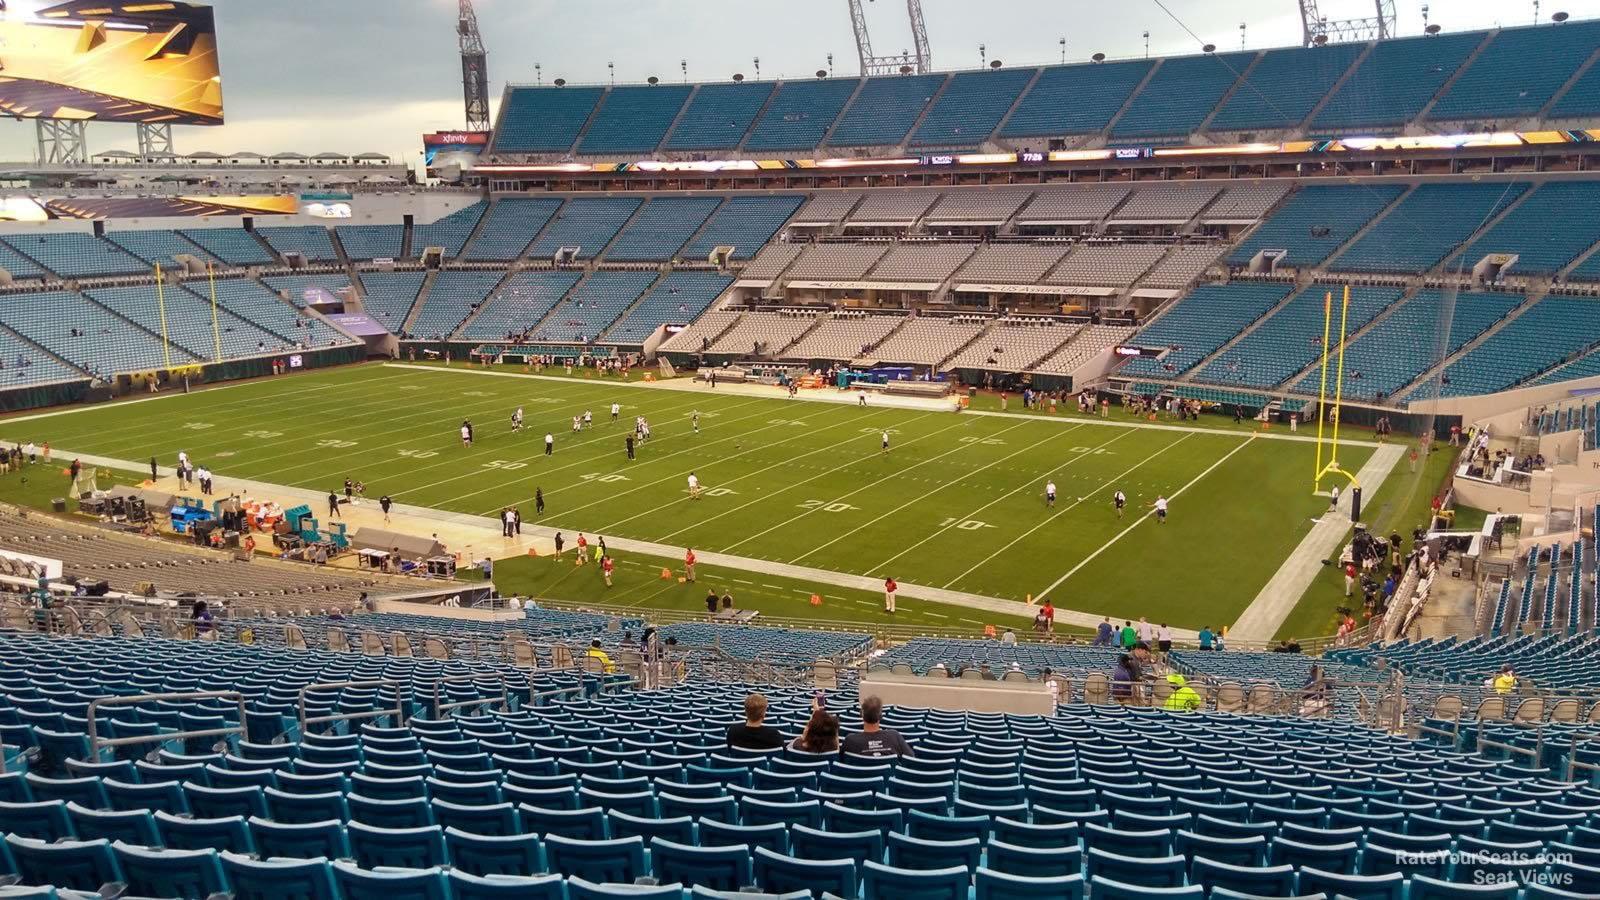 Section 204 at TIAA Bank Field